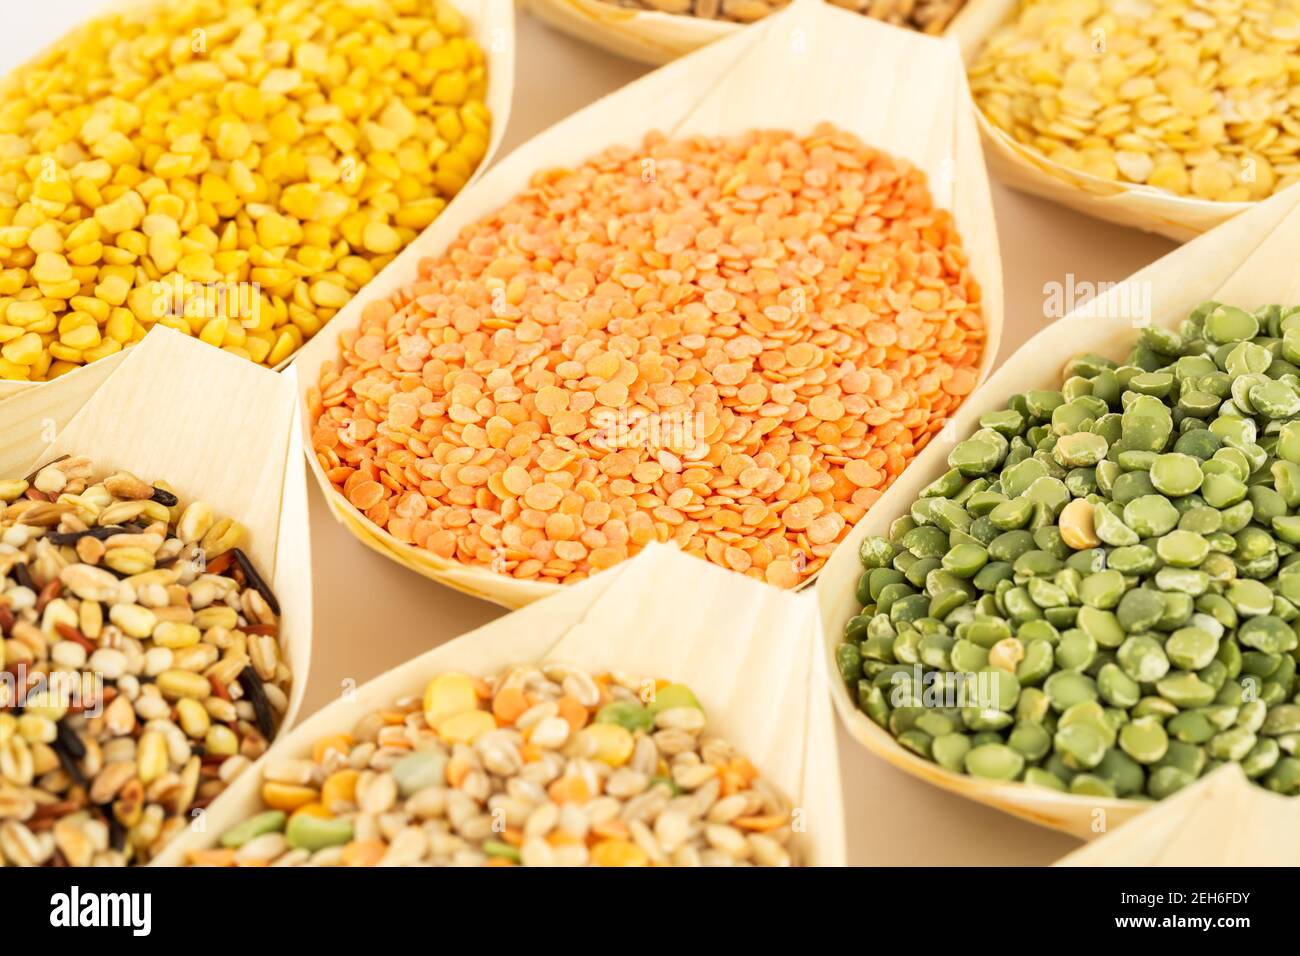 The collection of different groats in the bamboo bowls. Wheat, peas, rice and lentils. Stock Photo